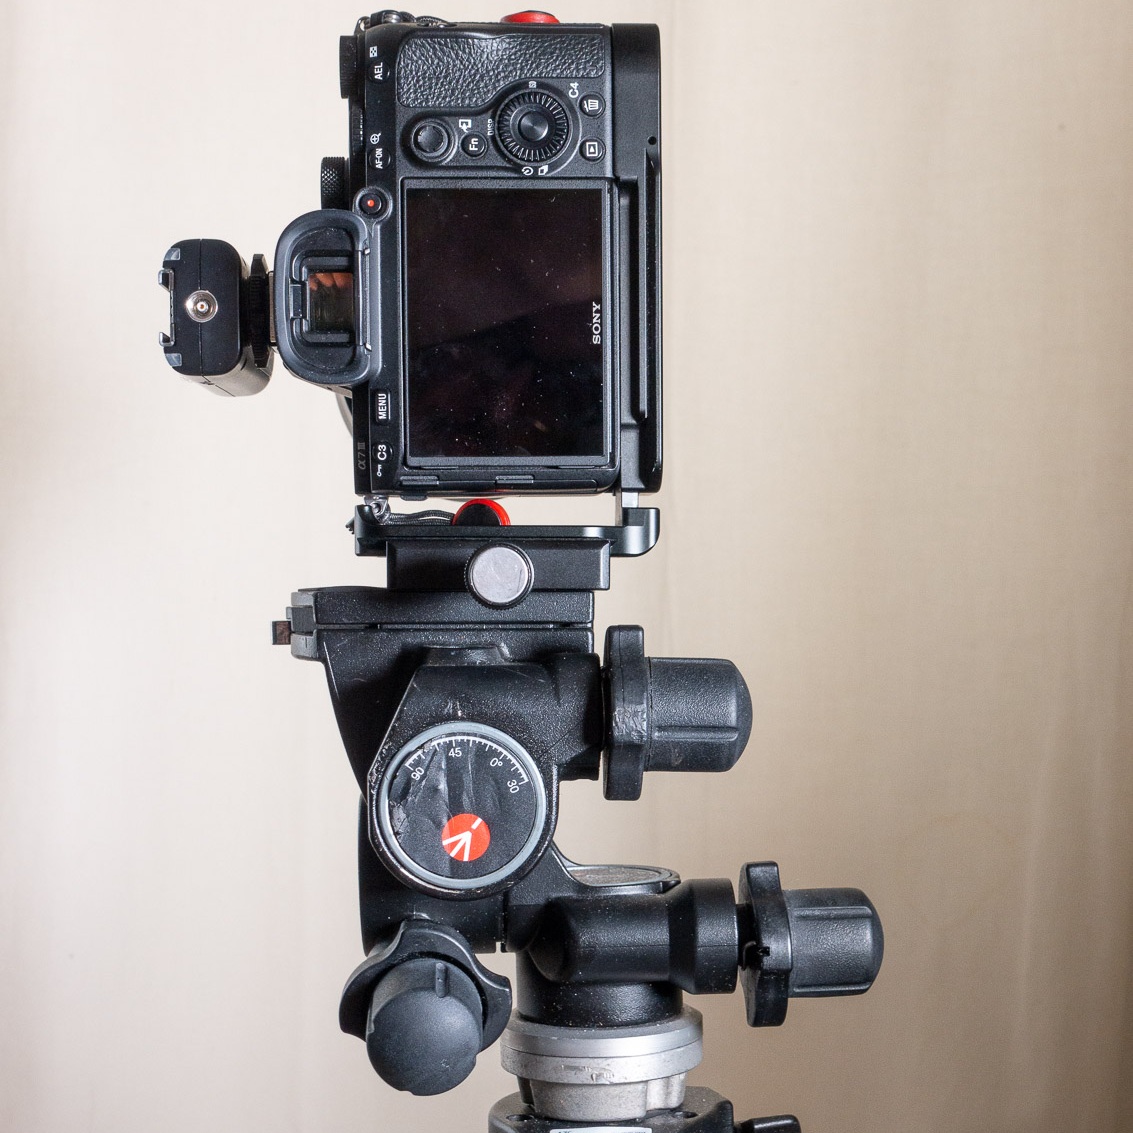  When using an L-Bracket, it’s much easier to get a portrait orientation with the camera and tripod head centered on the tripod. 